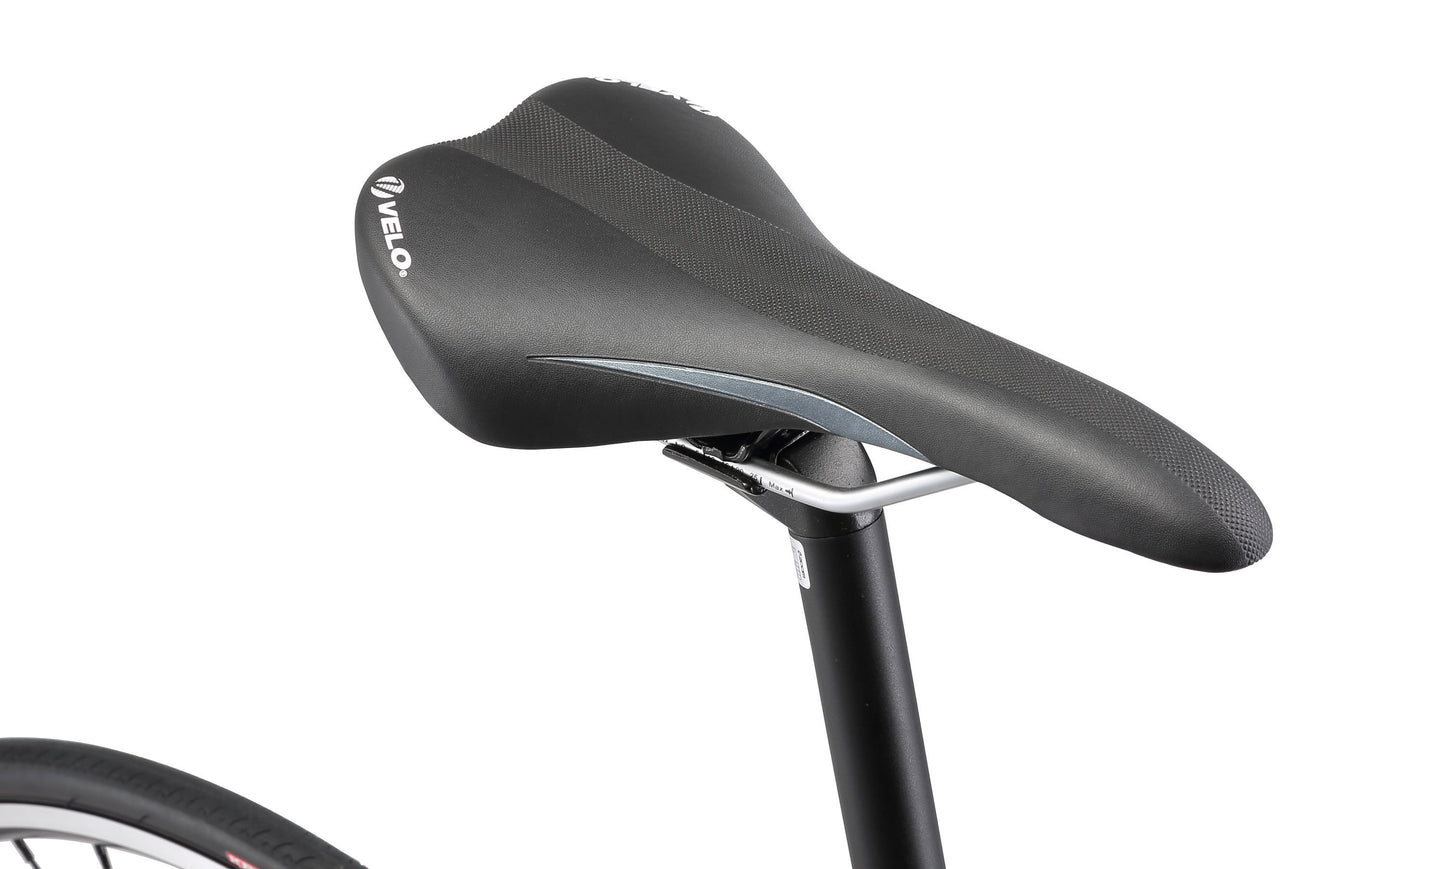 Falco Sport Road Bike in Charcoal showing performance Velo road saddle from Reid Cycles Australia